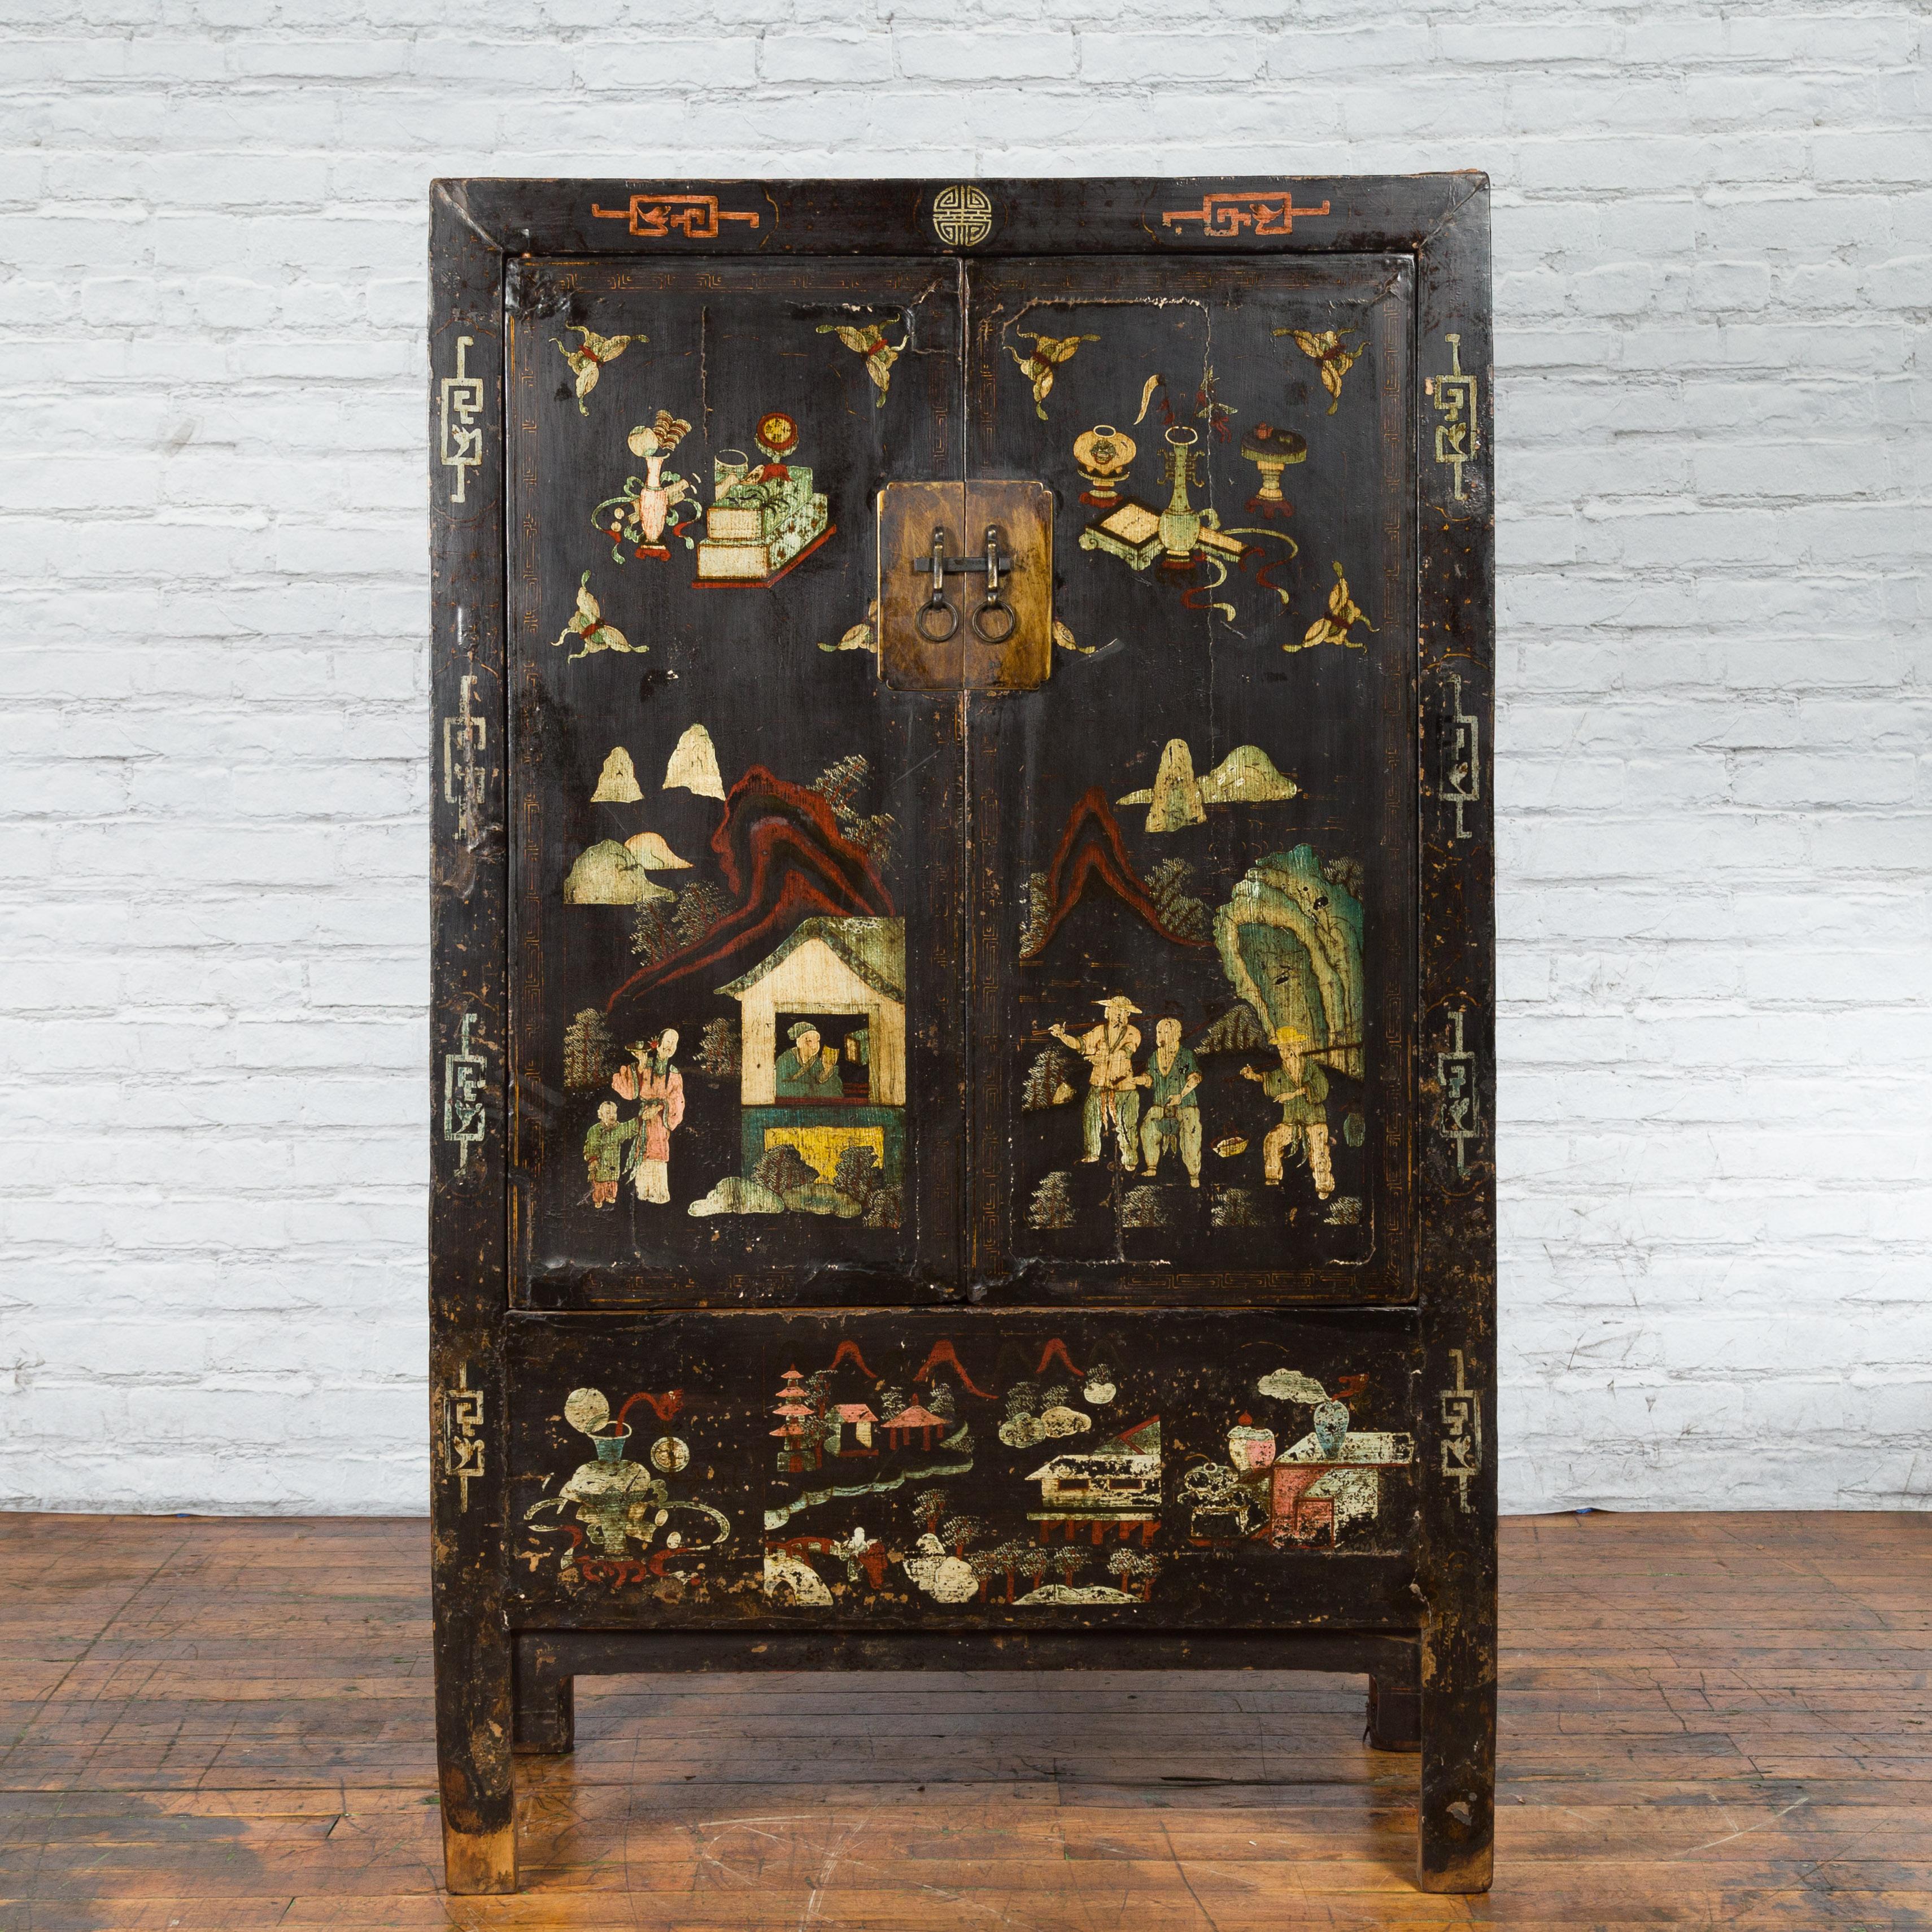 A Chinese Qing Dynasty period Shanxi cabinet from the 19th century, with original lacquer and hand-painted décor. Created in the North-Eastern province of Shanxi during the Qing dynasty, this 19th century cabinet features its original black lacquer